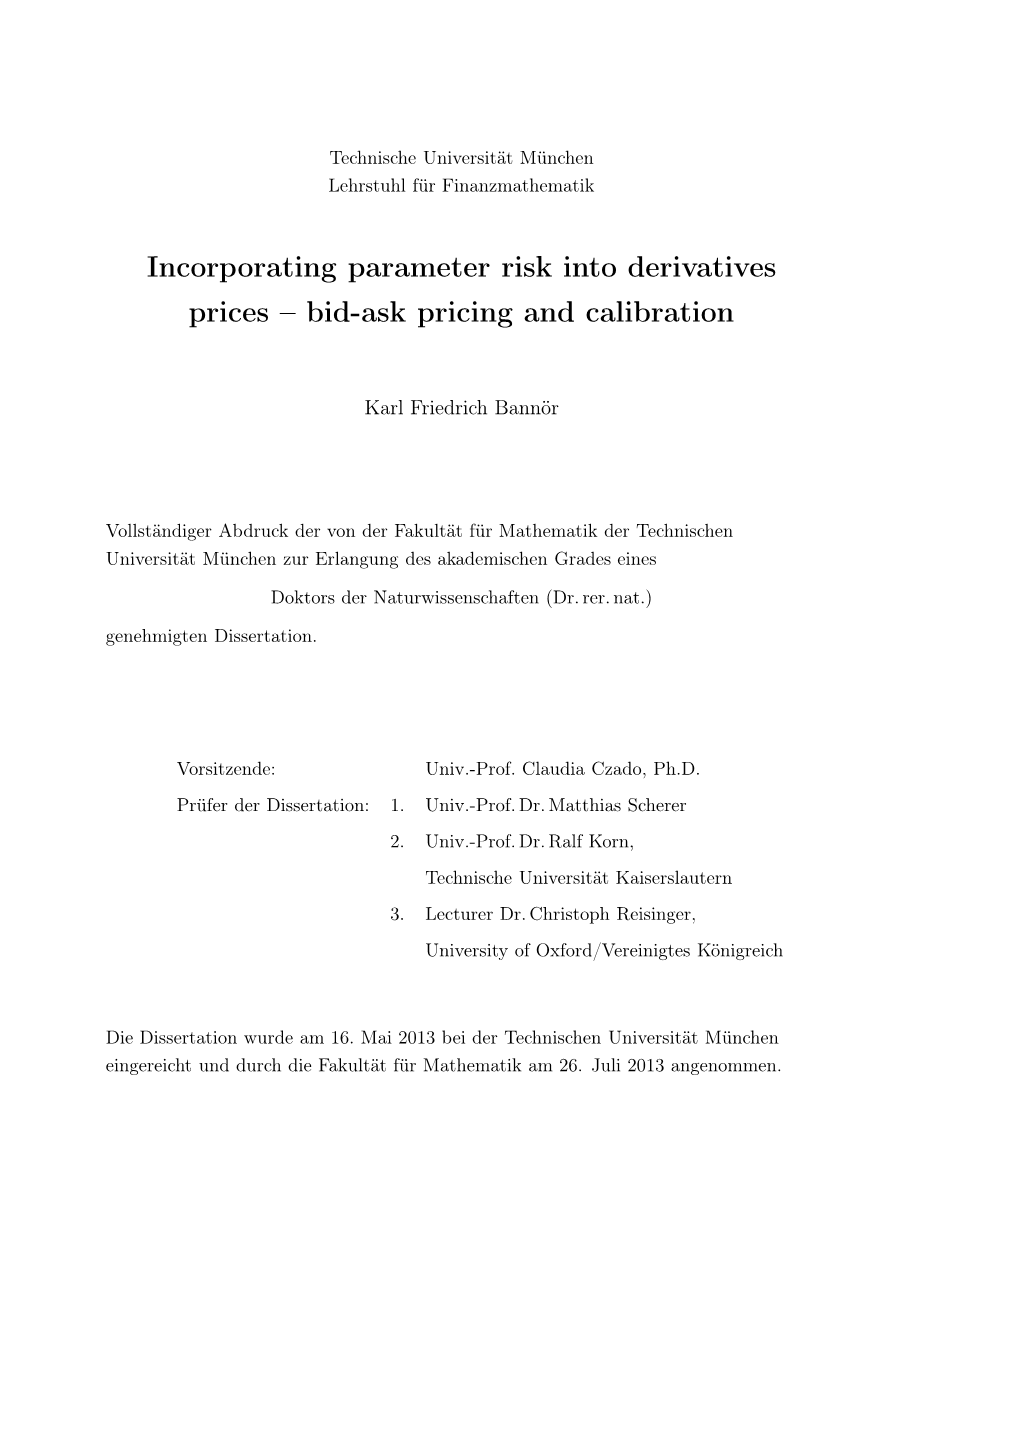 Incorporating Parameter Risk Into Derivatives Prices – Bid-Ask Pricing and Calibration